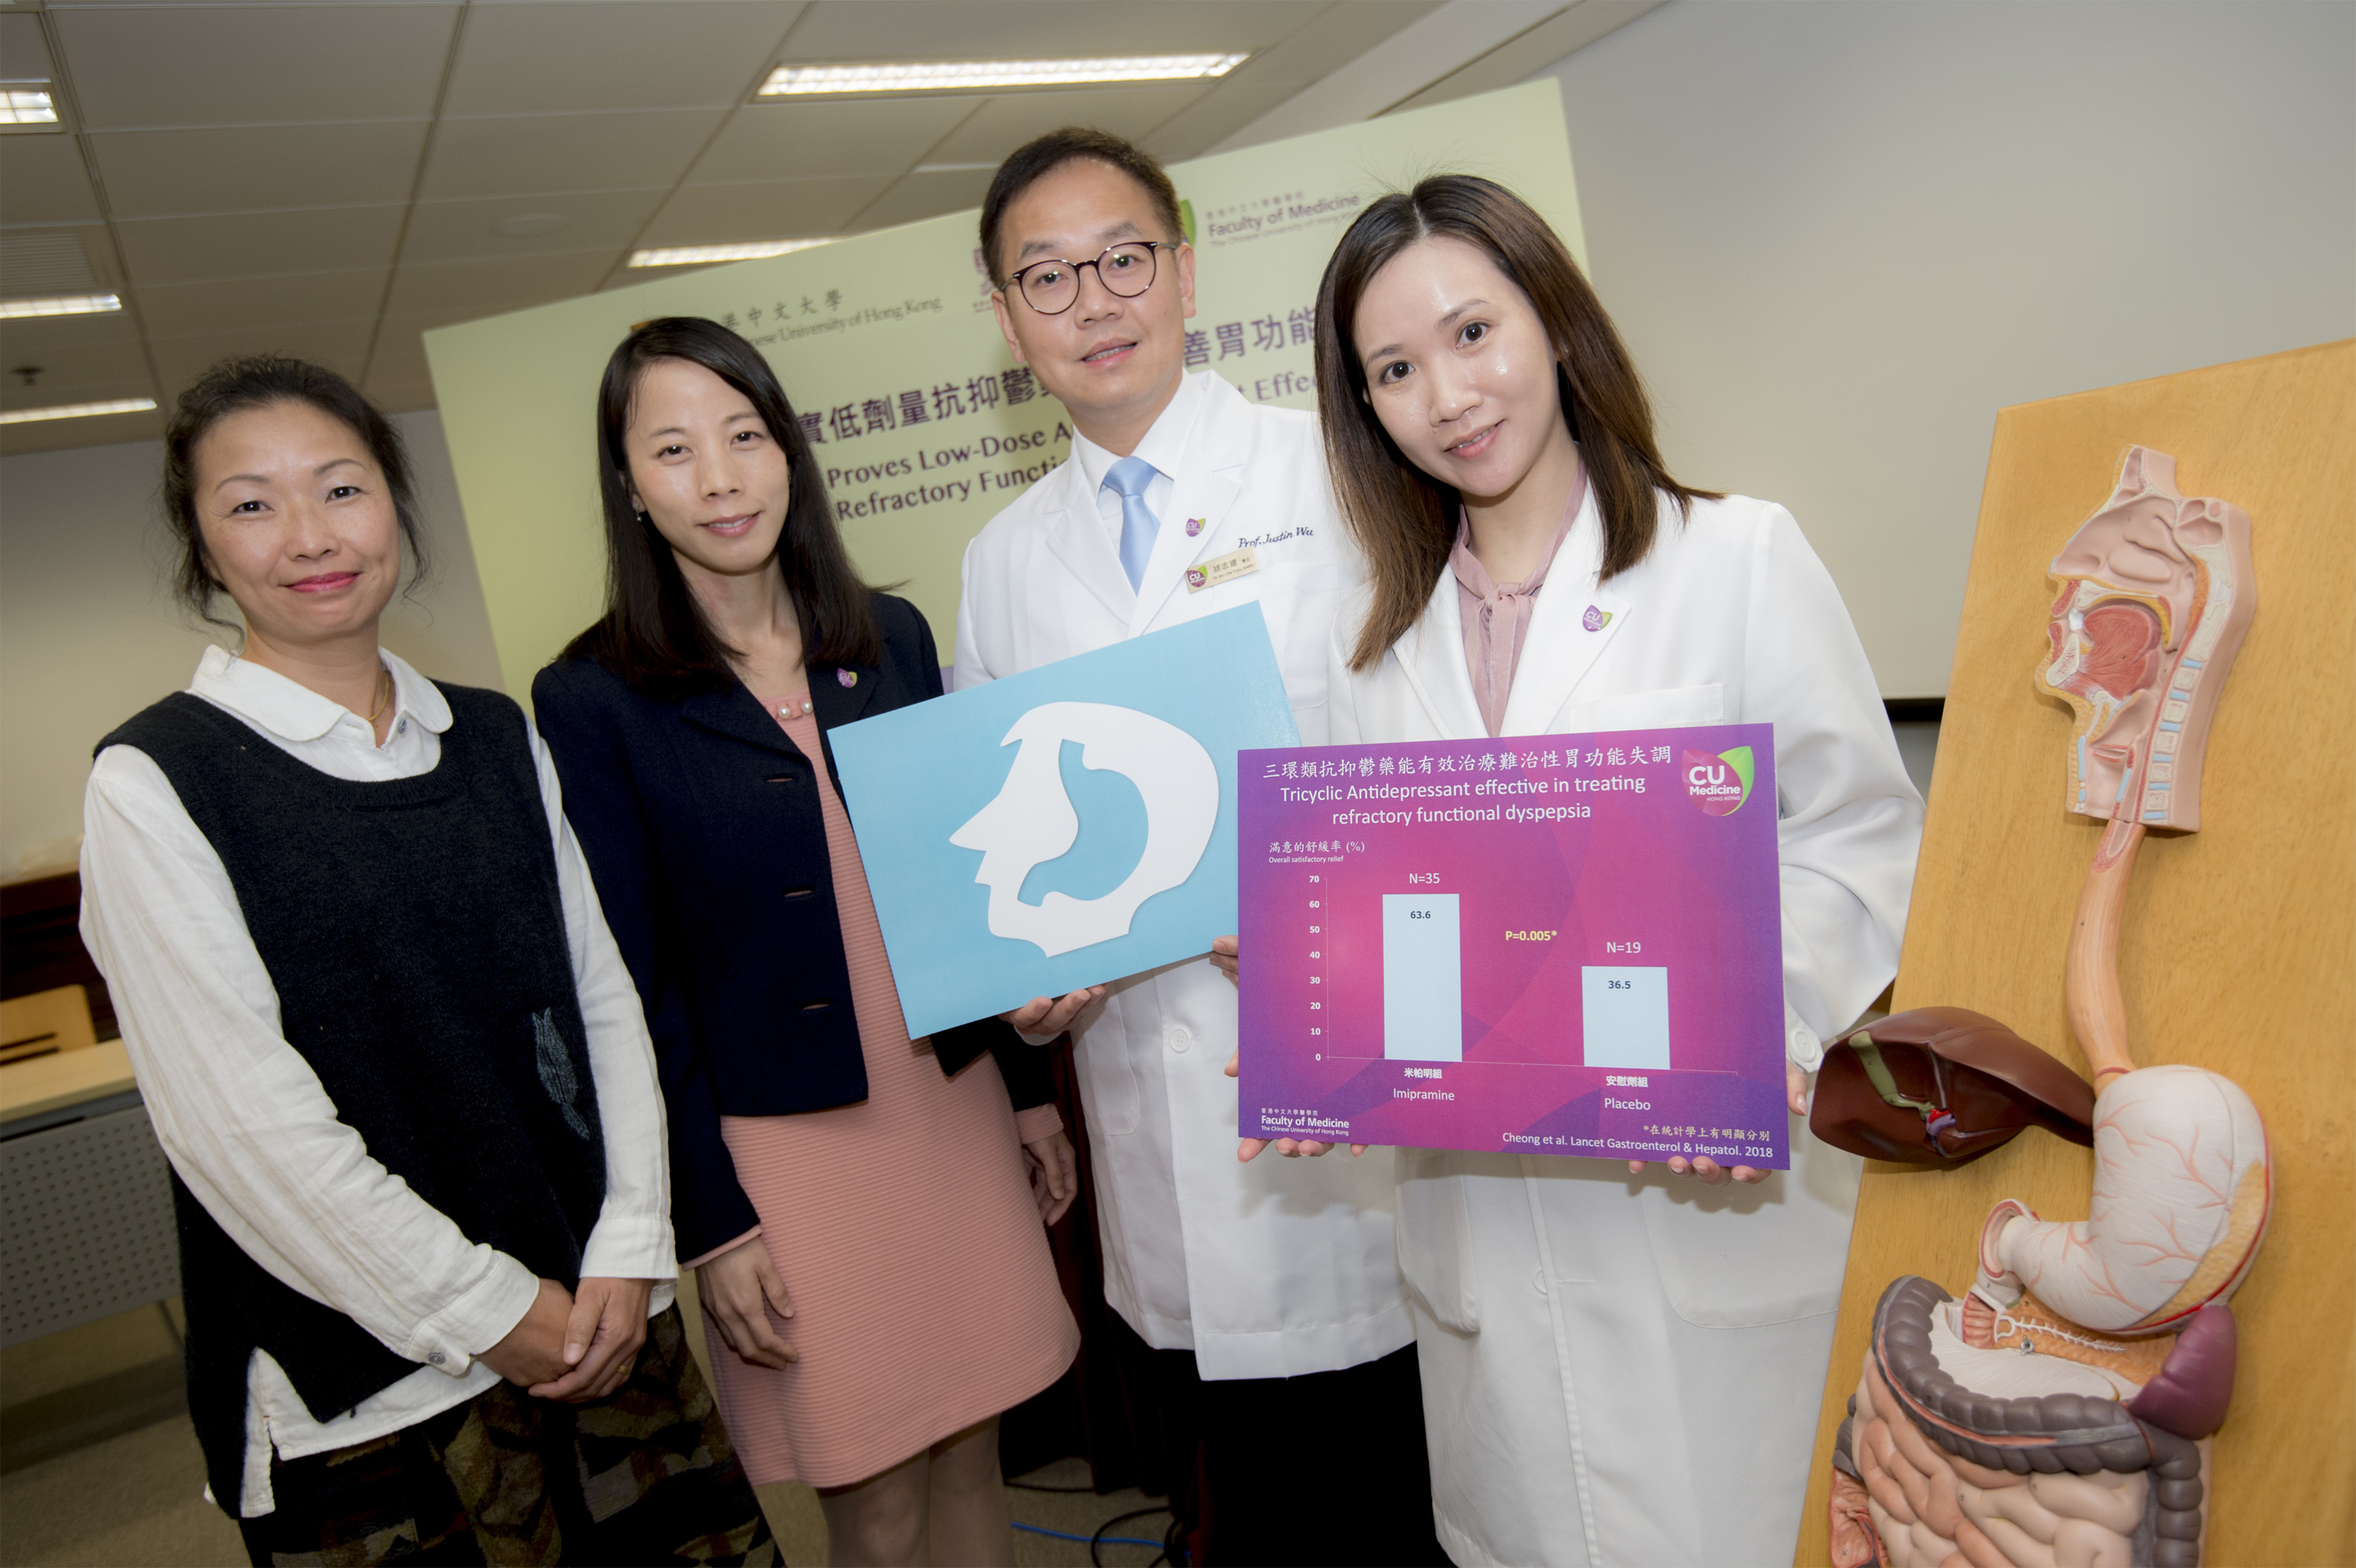 From left: Ms. LEE, functional dyspepsia patient; Ms. Yawen CHAN, Clinical Psychologist, Hong Kong Institute of Integrative Medicine; Professor Justin WU and Research Associate Ms. Pui Kuan CHEONG from the Division of Gastroenterology and Hepatology, Department of Medicine and Therapeutics, CUHK Medicine.